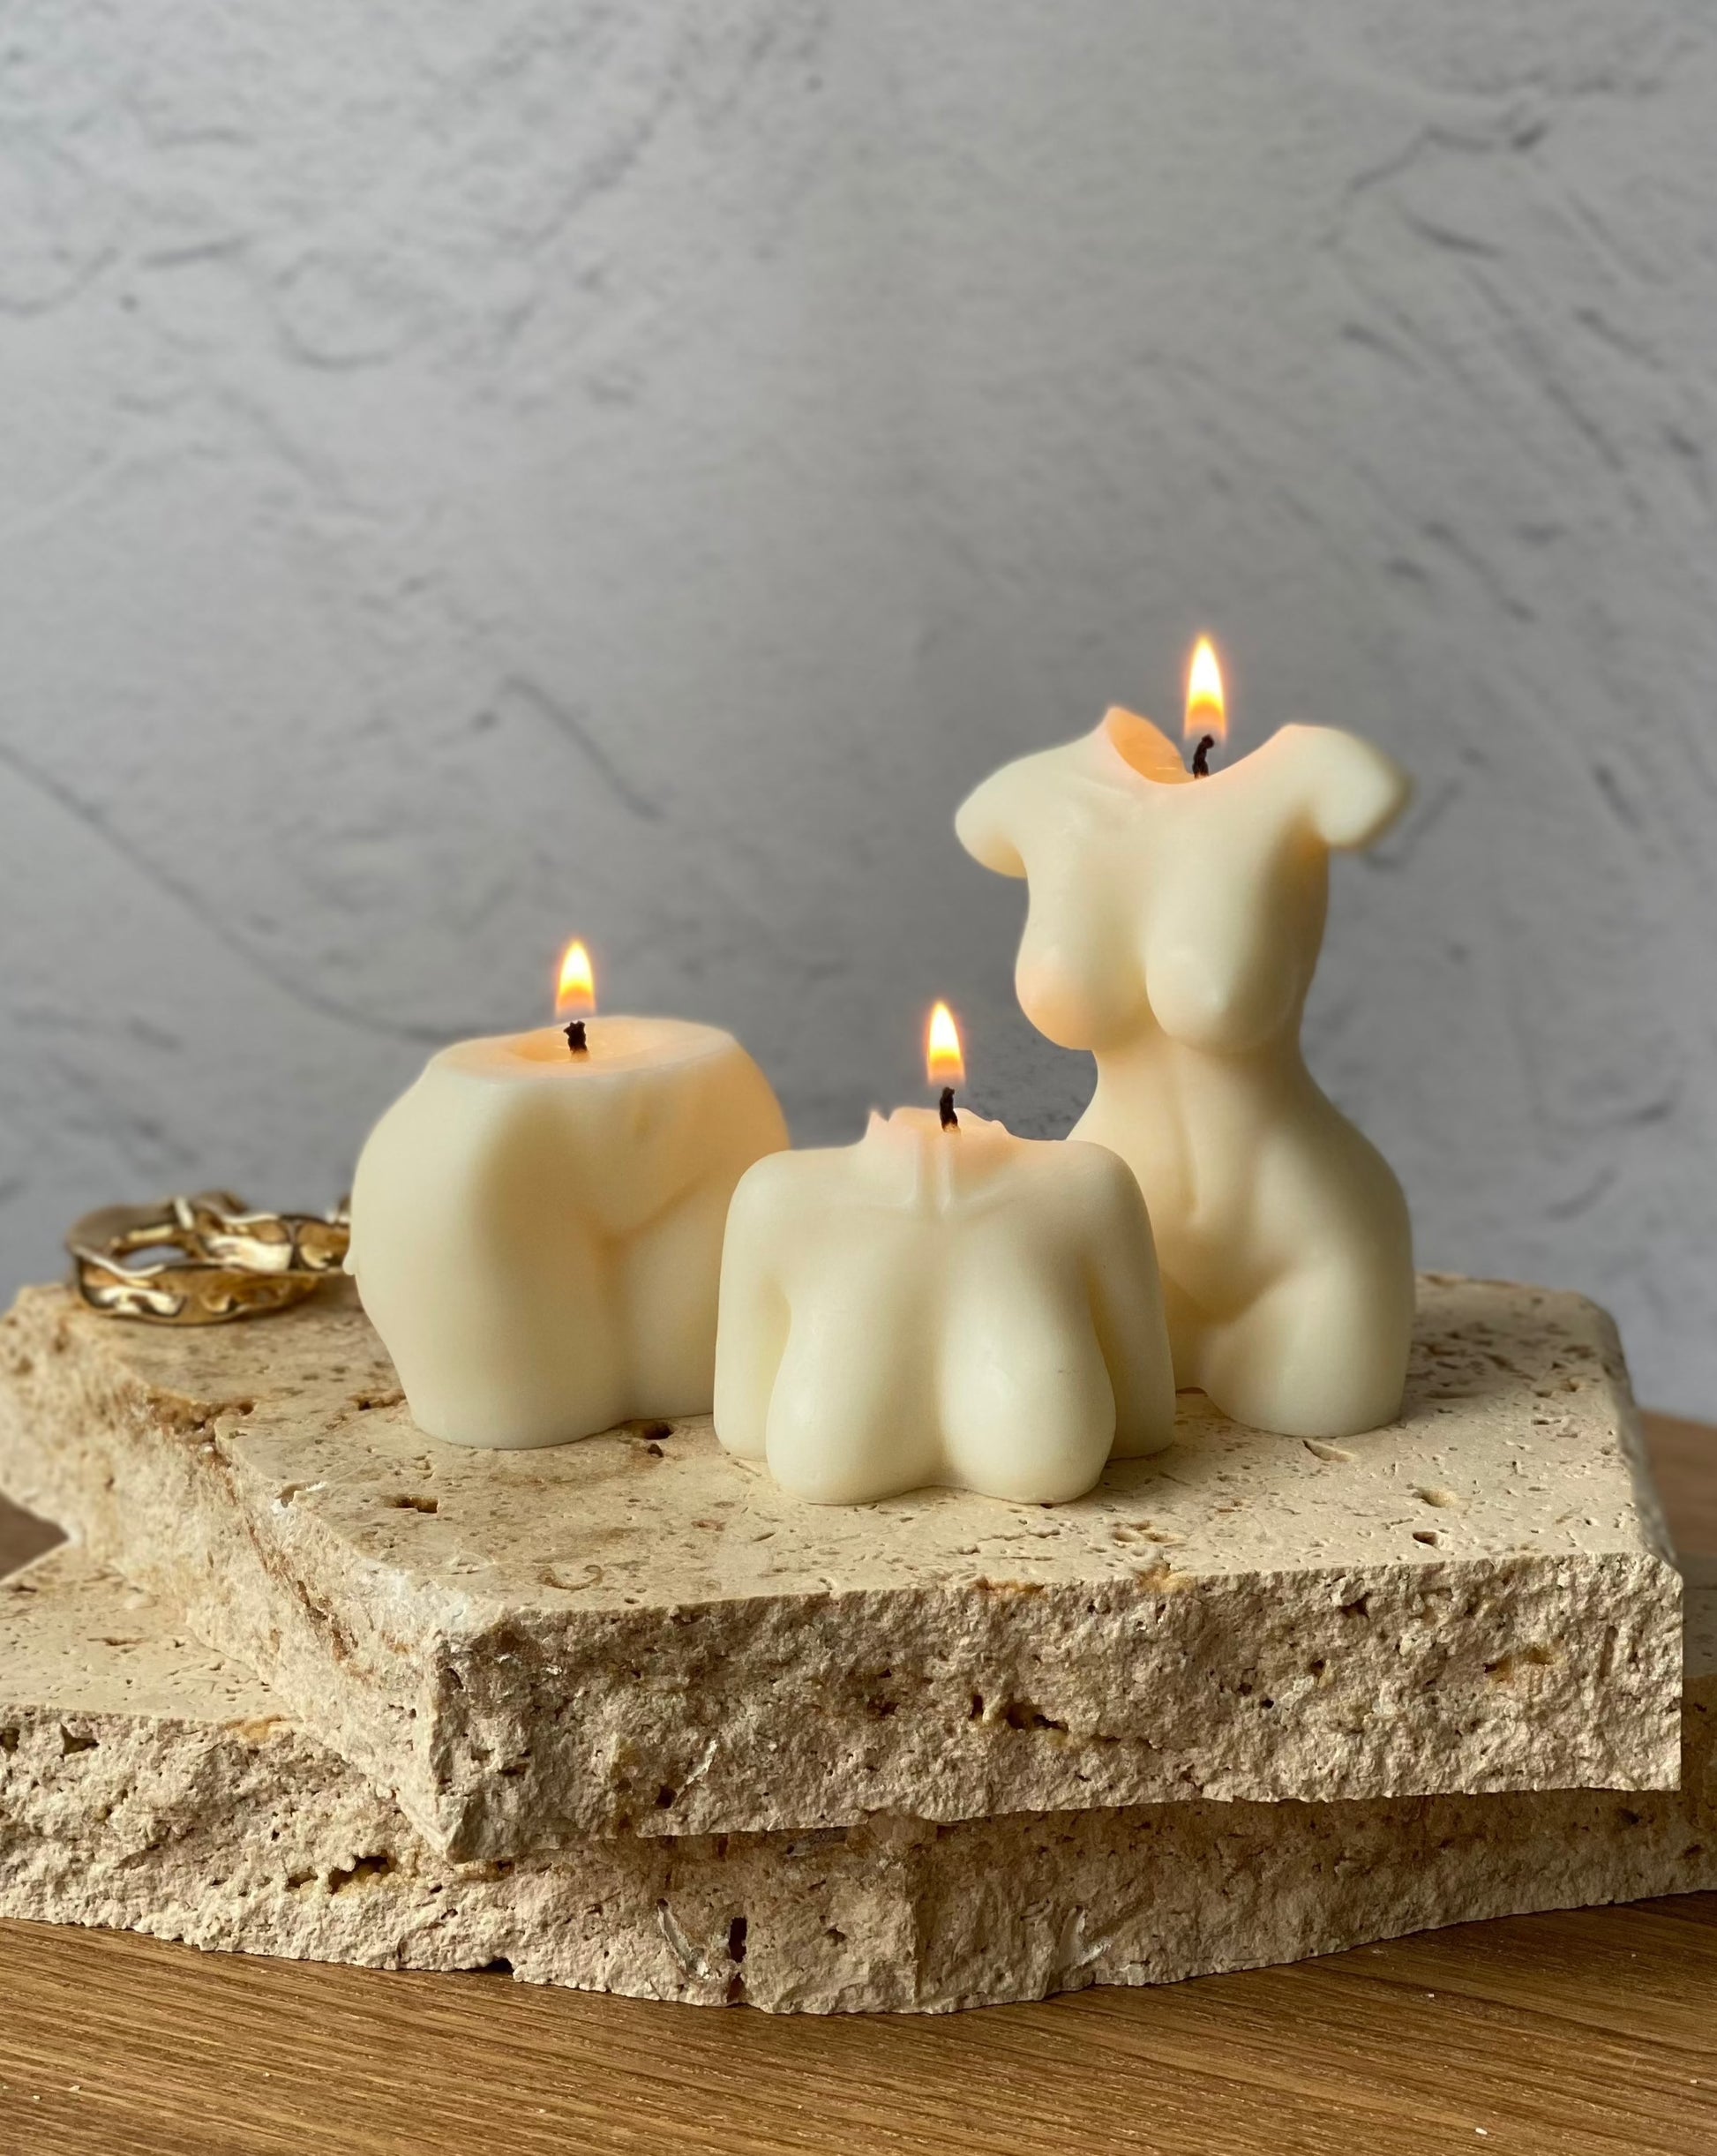 Lush 3 piece Body Torso Candle Gift Set | Empowering women body torso candle gift sets | Body Positivity | Body Candles Australia | Body Torso Candles | Scented Candles | Unscented Candles | Candles Australia | Free Standing Candles Australia | Special Ca